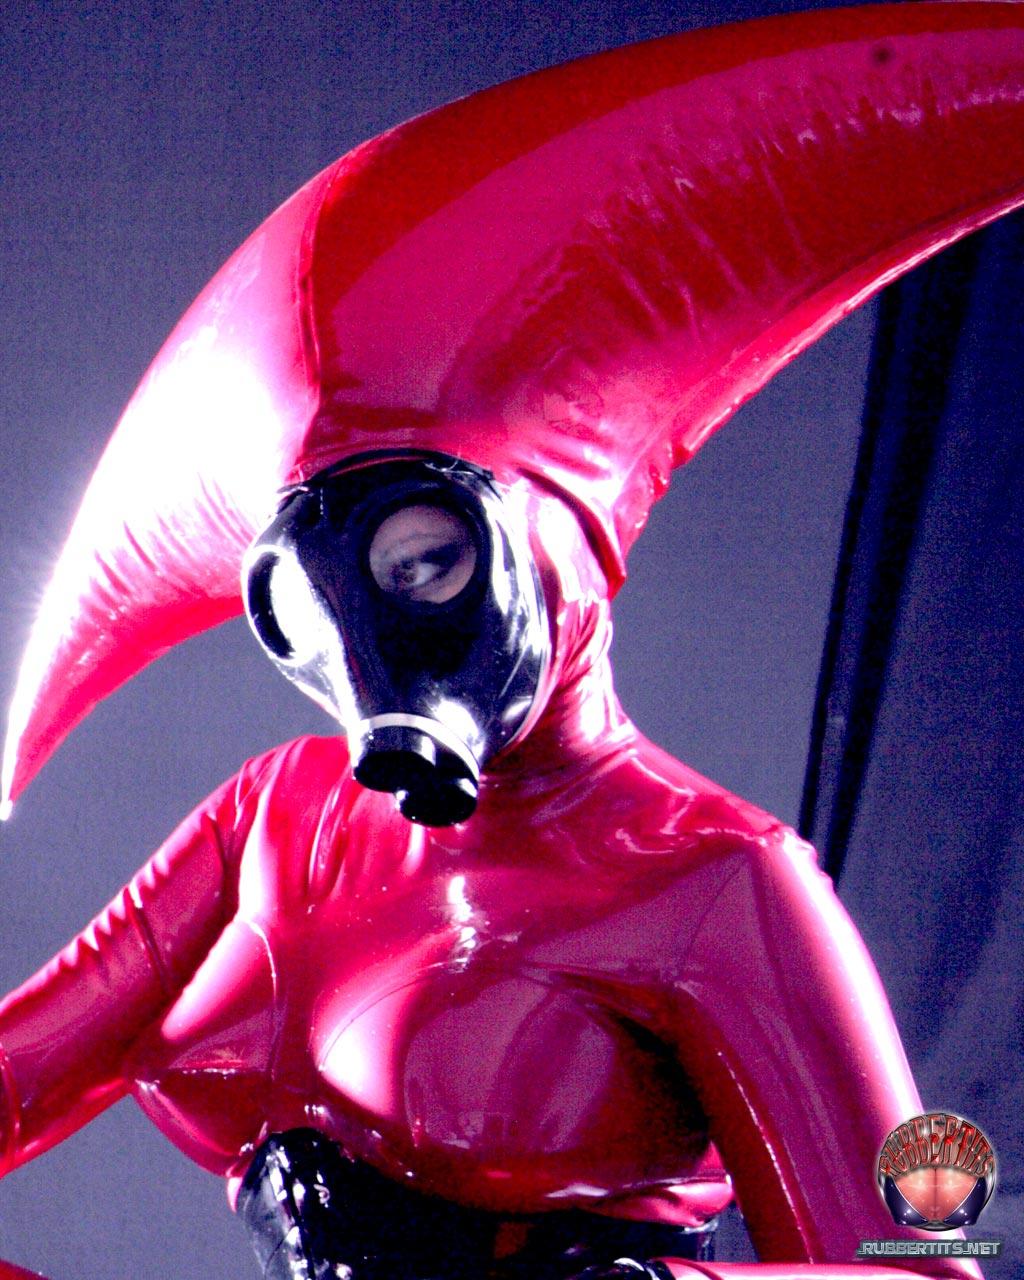 Lesbians Darkwing Zero & Lady Cassandra wear latex costumes during SFW play foto porno #422975545 | Rubber Tits Pics, Darkwing Zero, Lady Cassandra, Latex, porno móvil